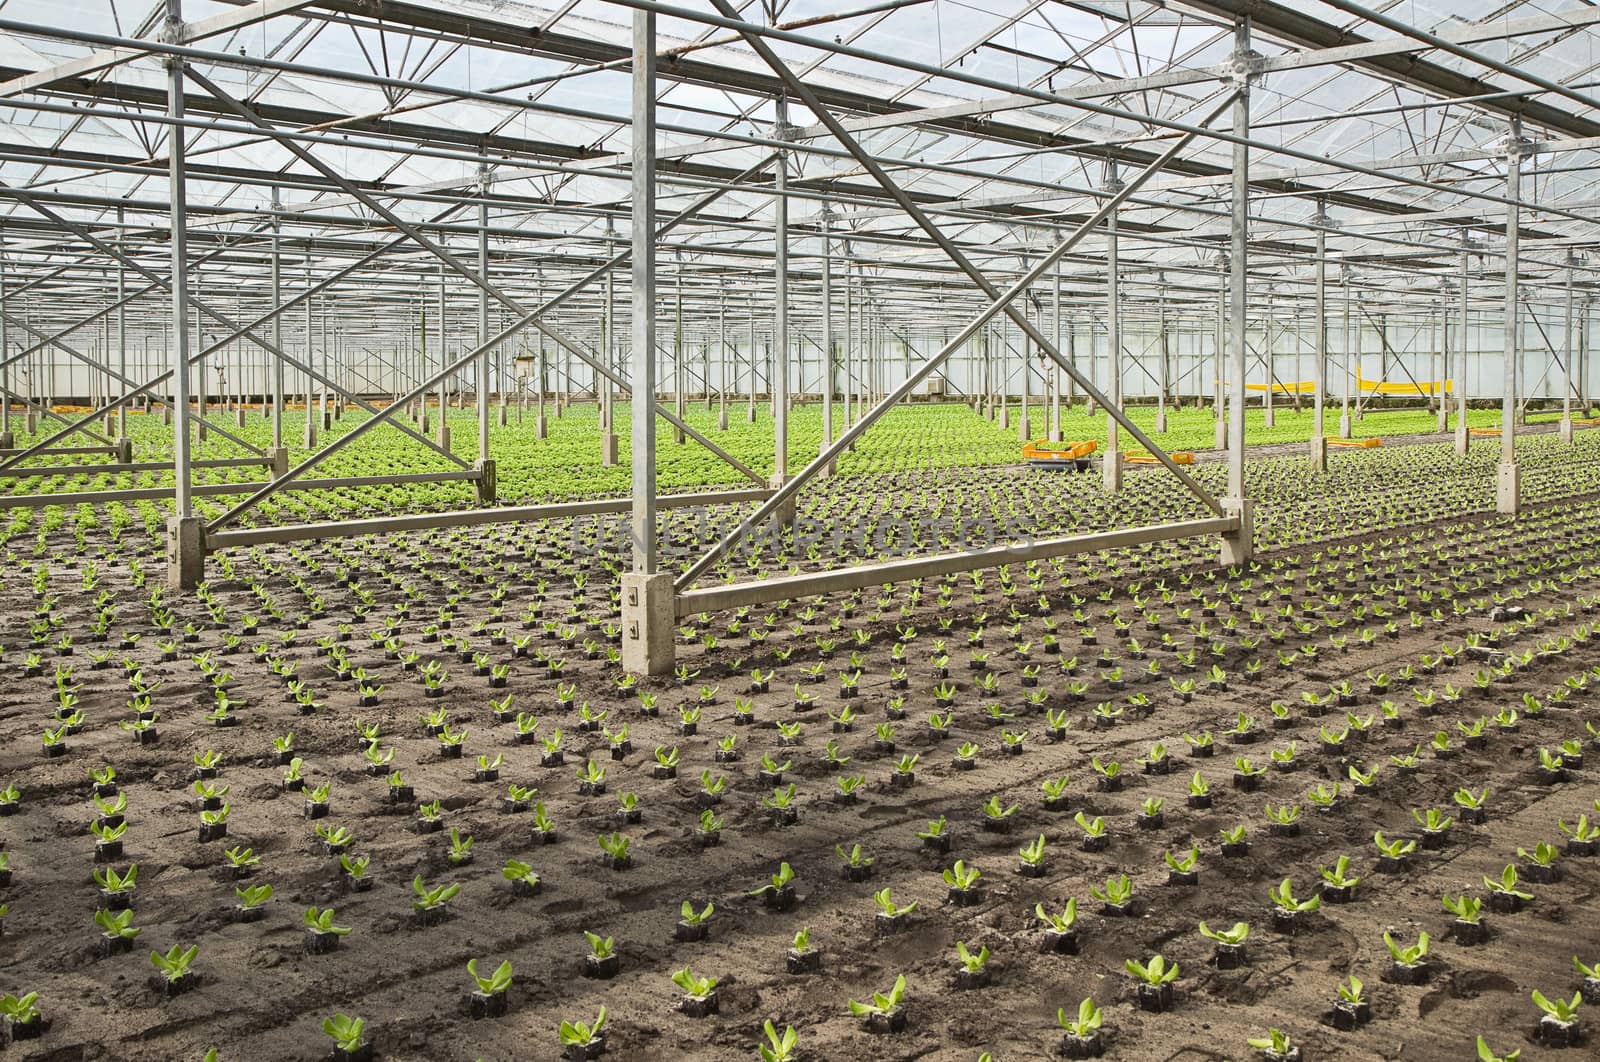 Overview working on new planting of young Salad plants in glasshouse in summer - horizontal